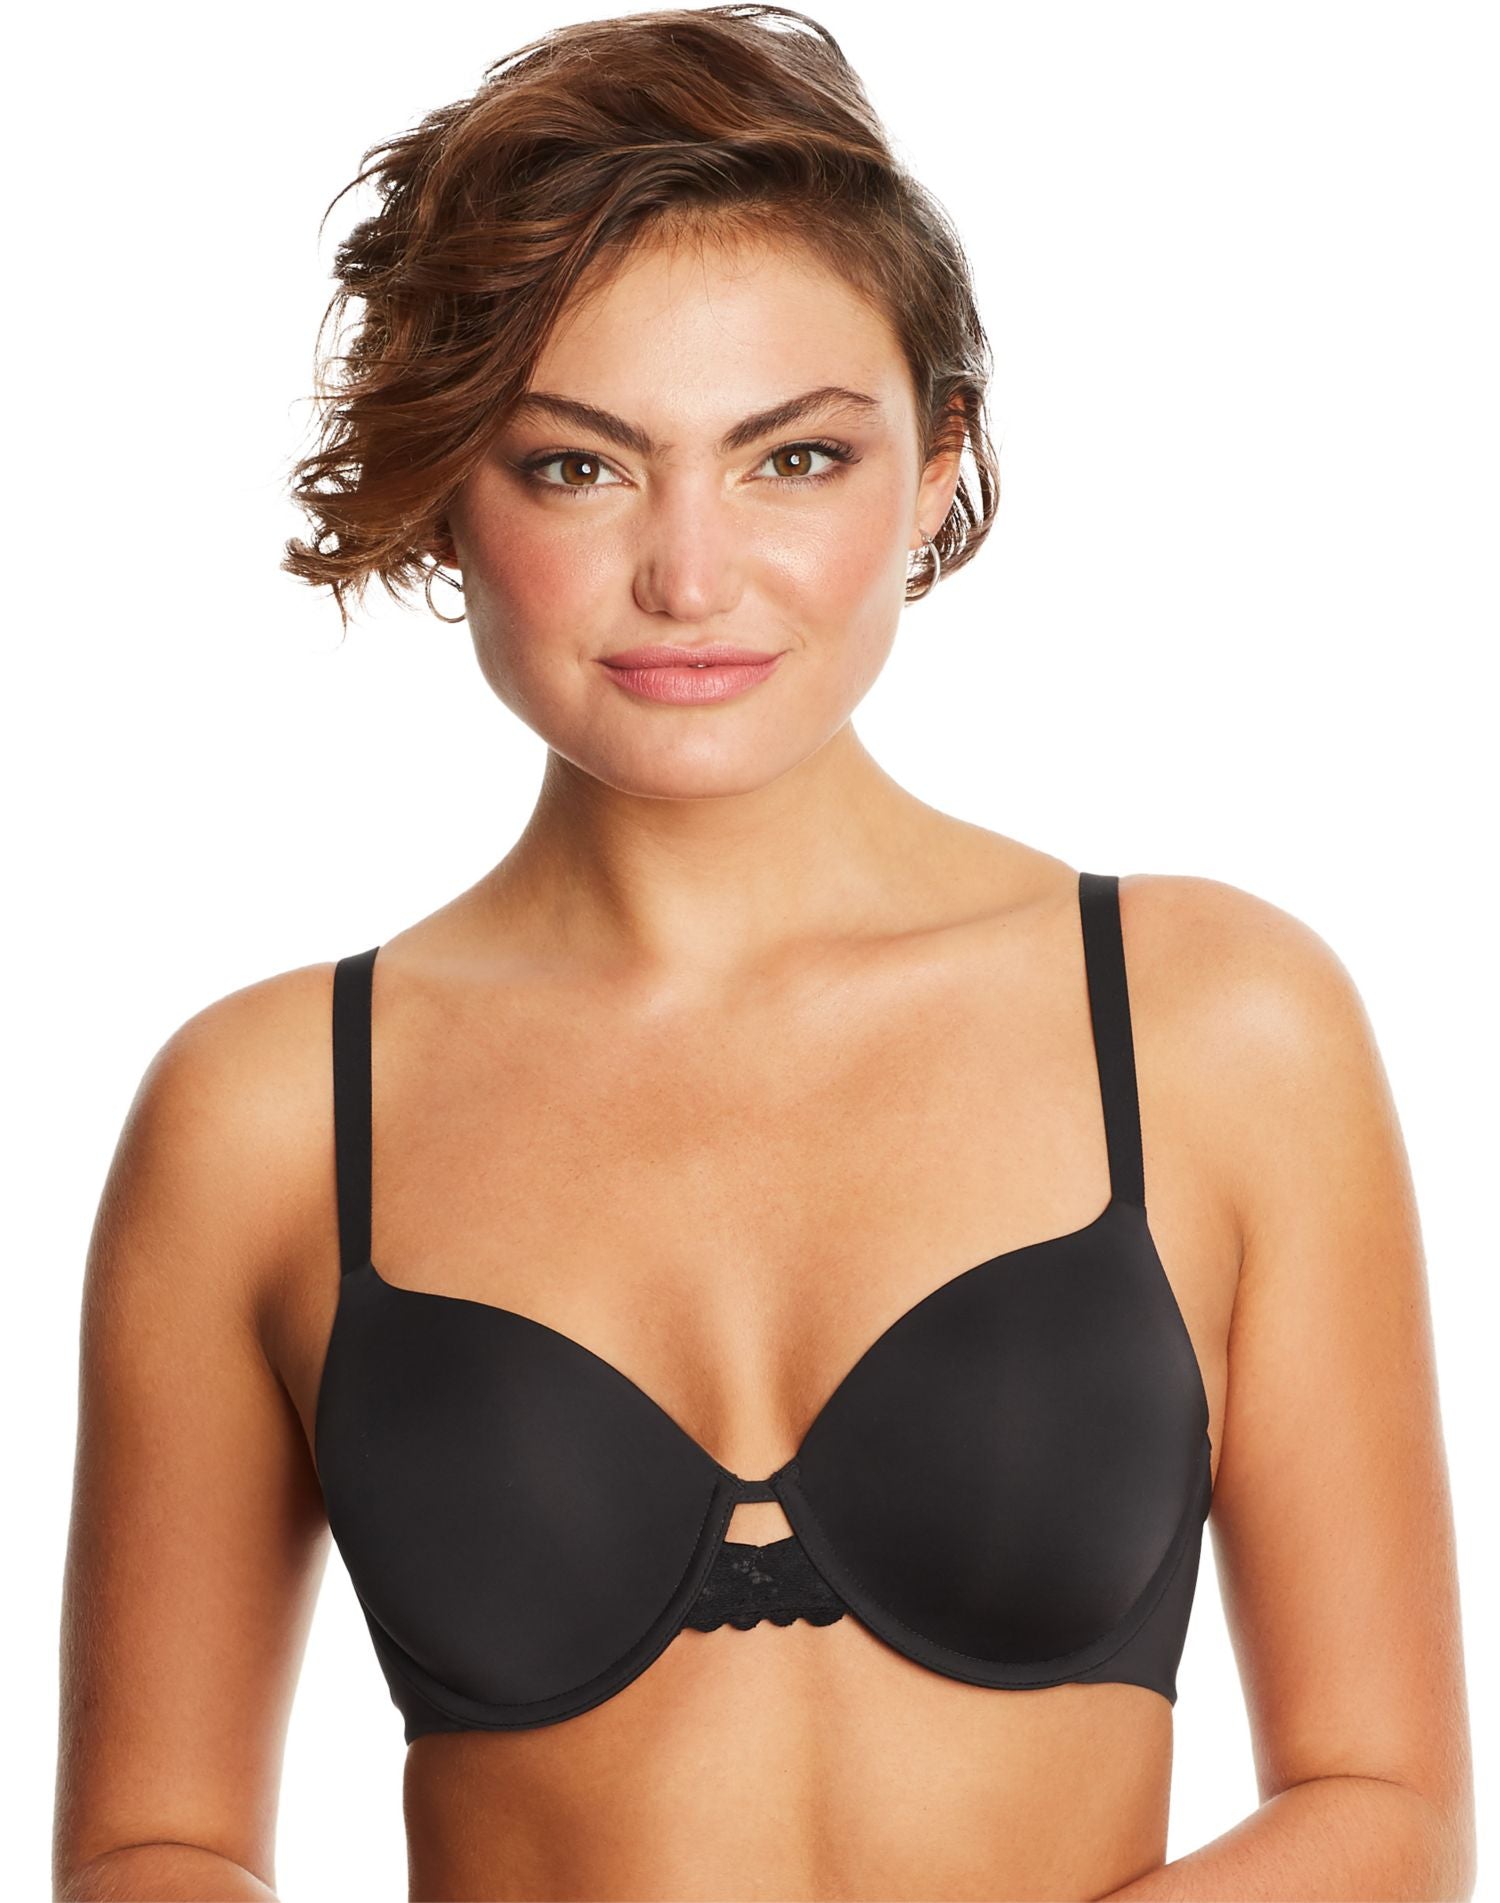 DM7549 - Maidenform Womens One Fabulous Fit 2.0 Full Coverage Underwire Bra